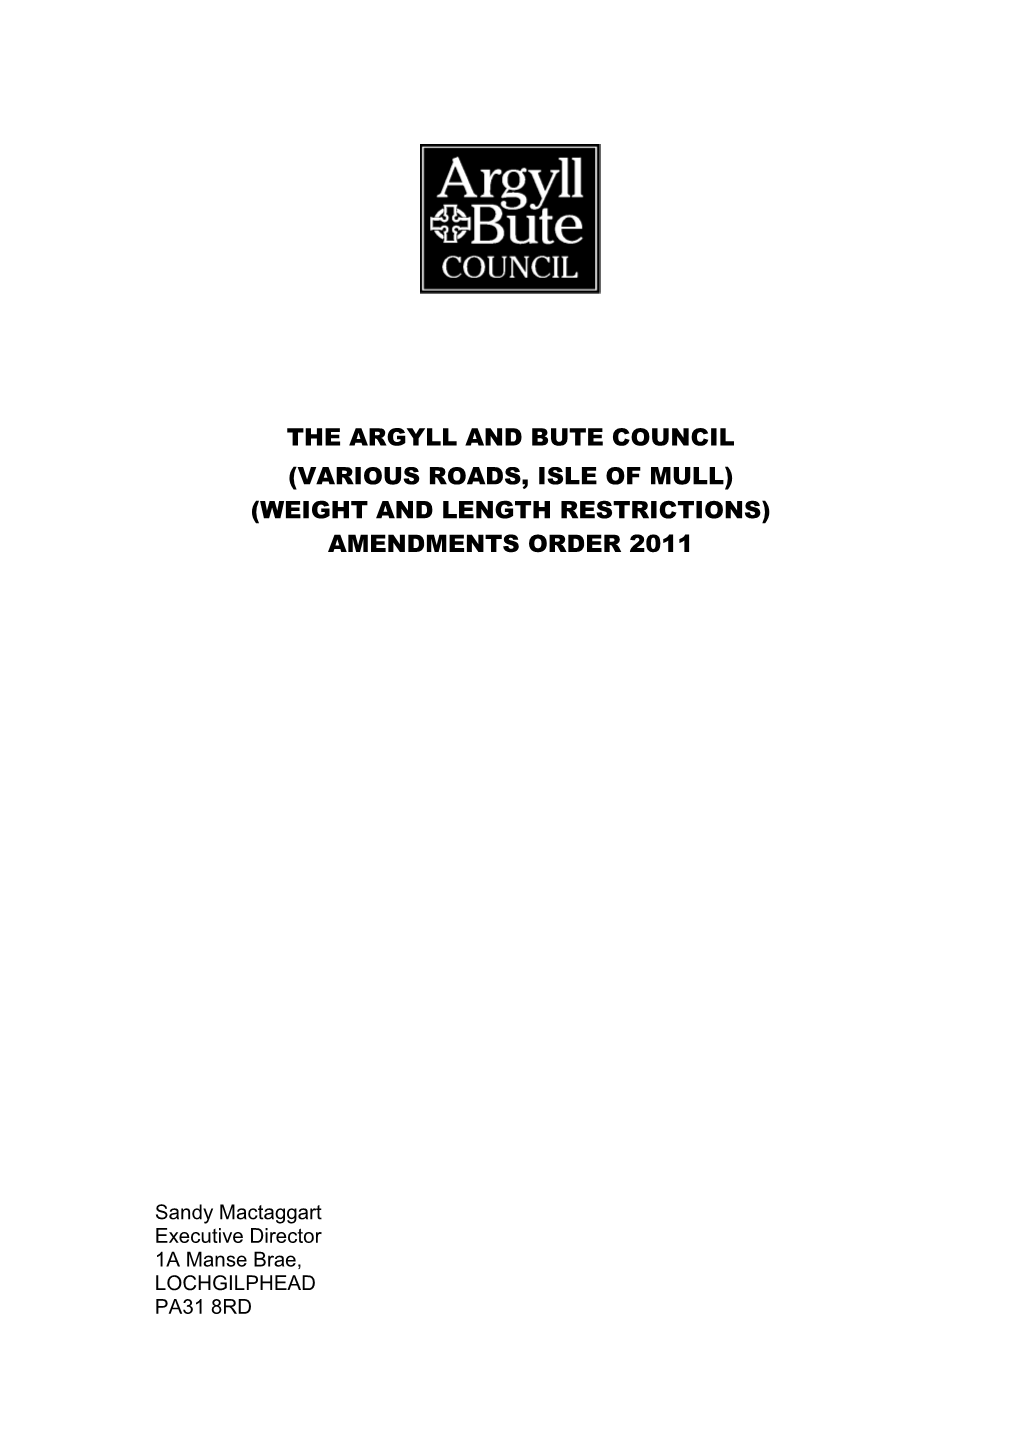 The Argyll and Bute Council (Various Roads, Isle of Mull) (Weight and Length Restrictions) Amendments Order 2011